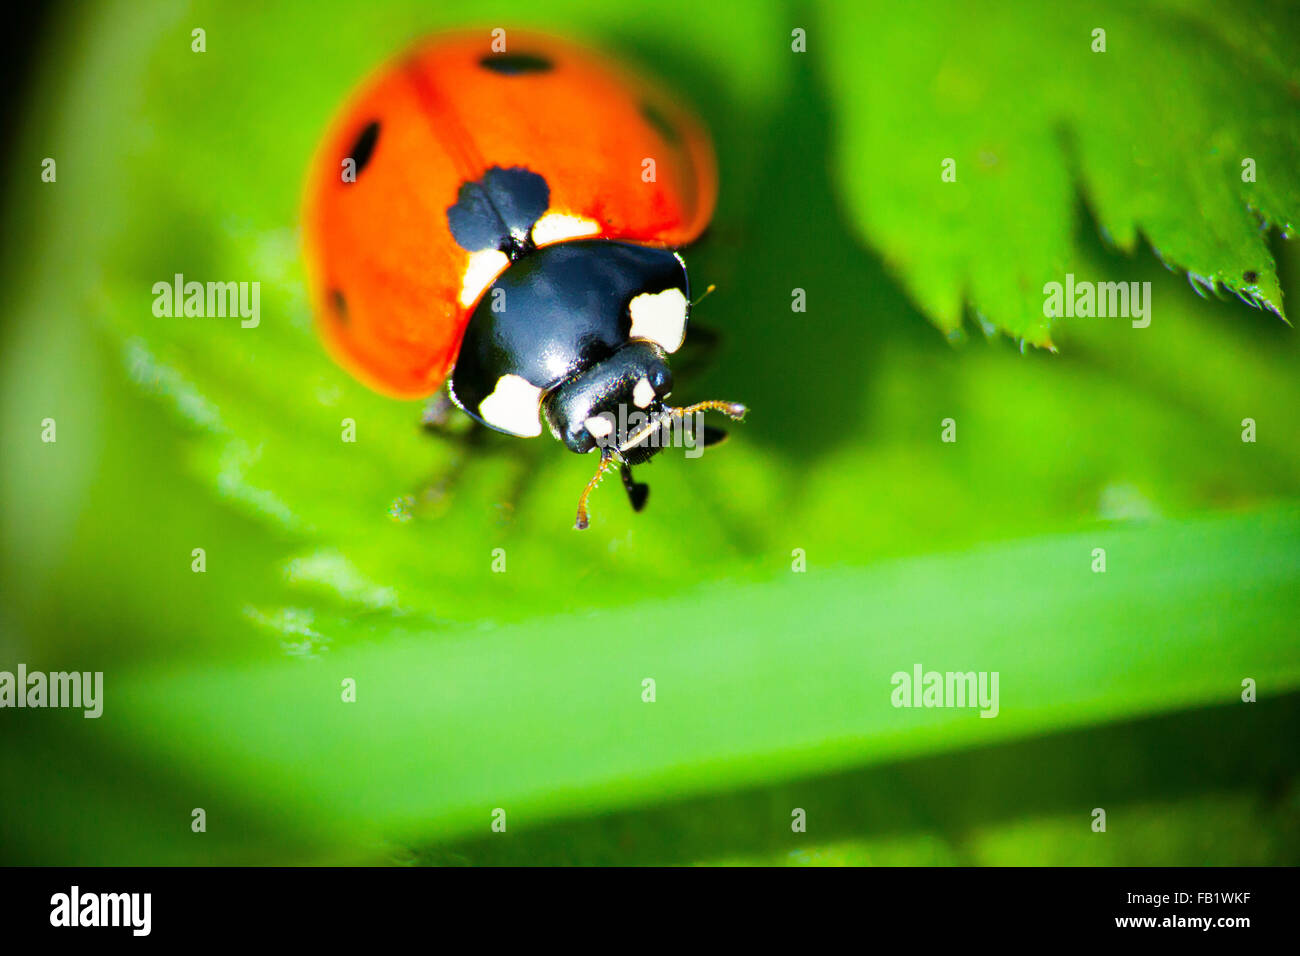 Ladybird with red and black spots on a green leaf Stock Photo